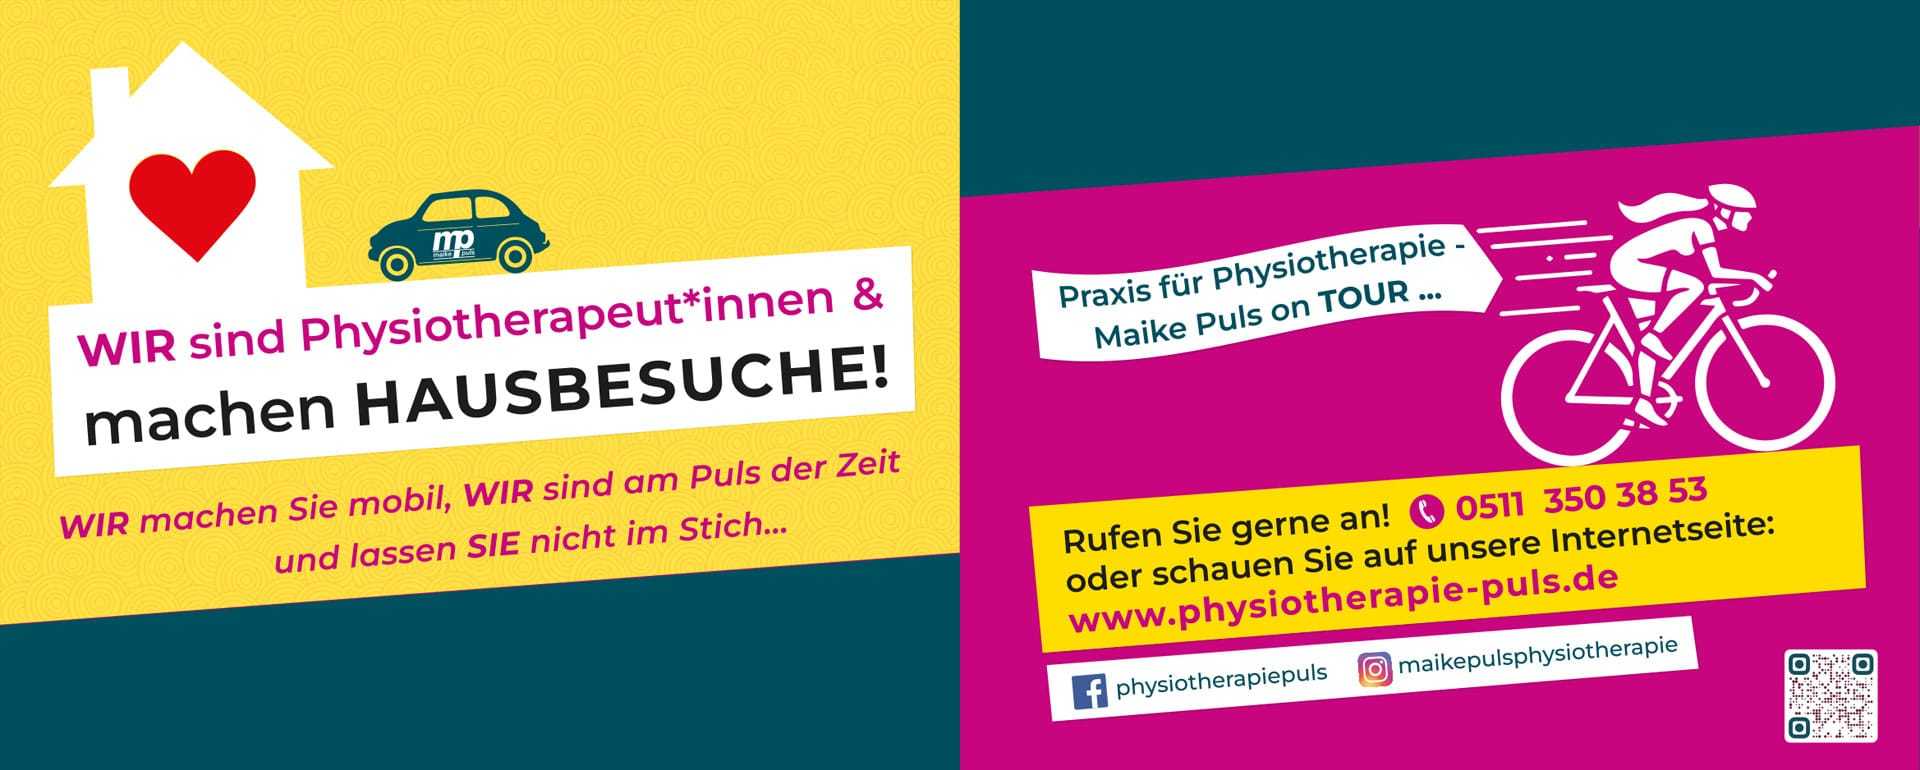 Hausbesuche Physiotherapie Hannover